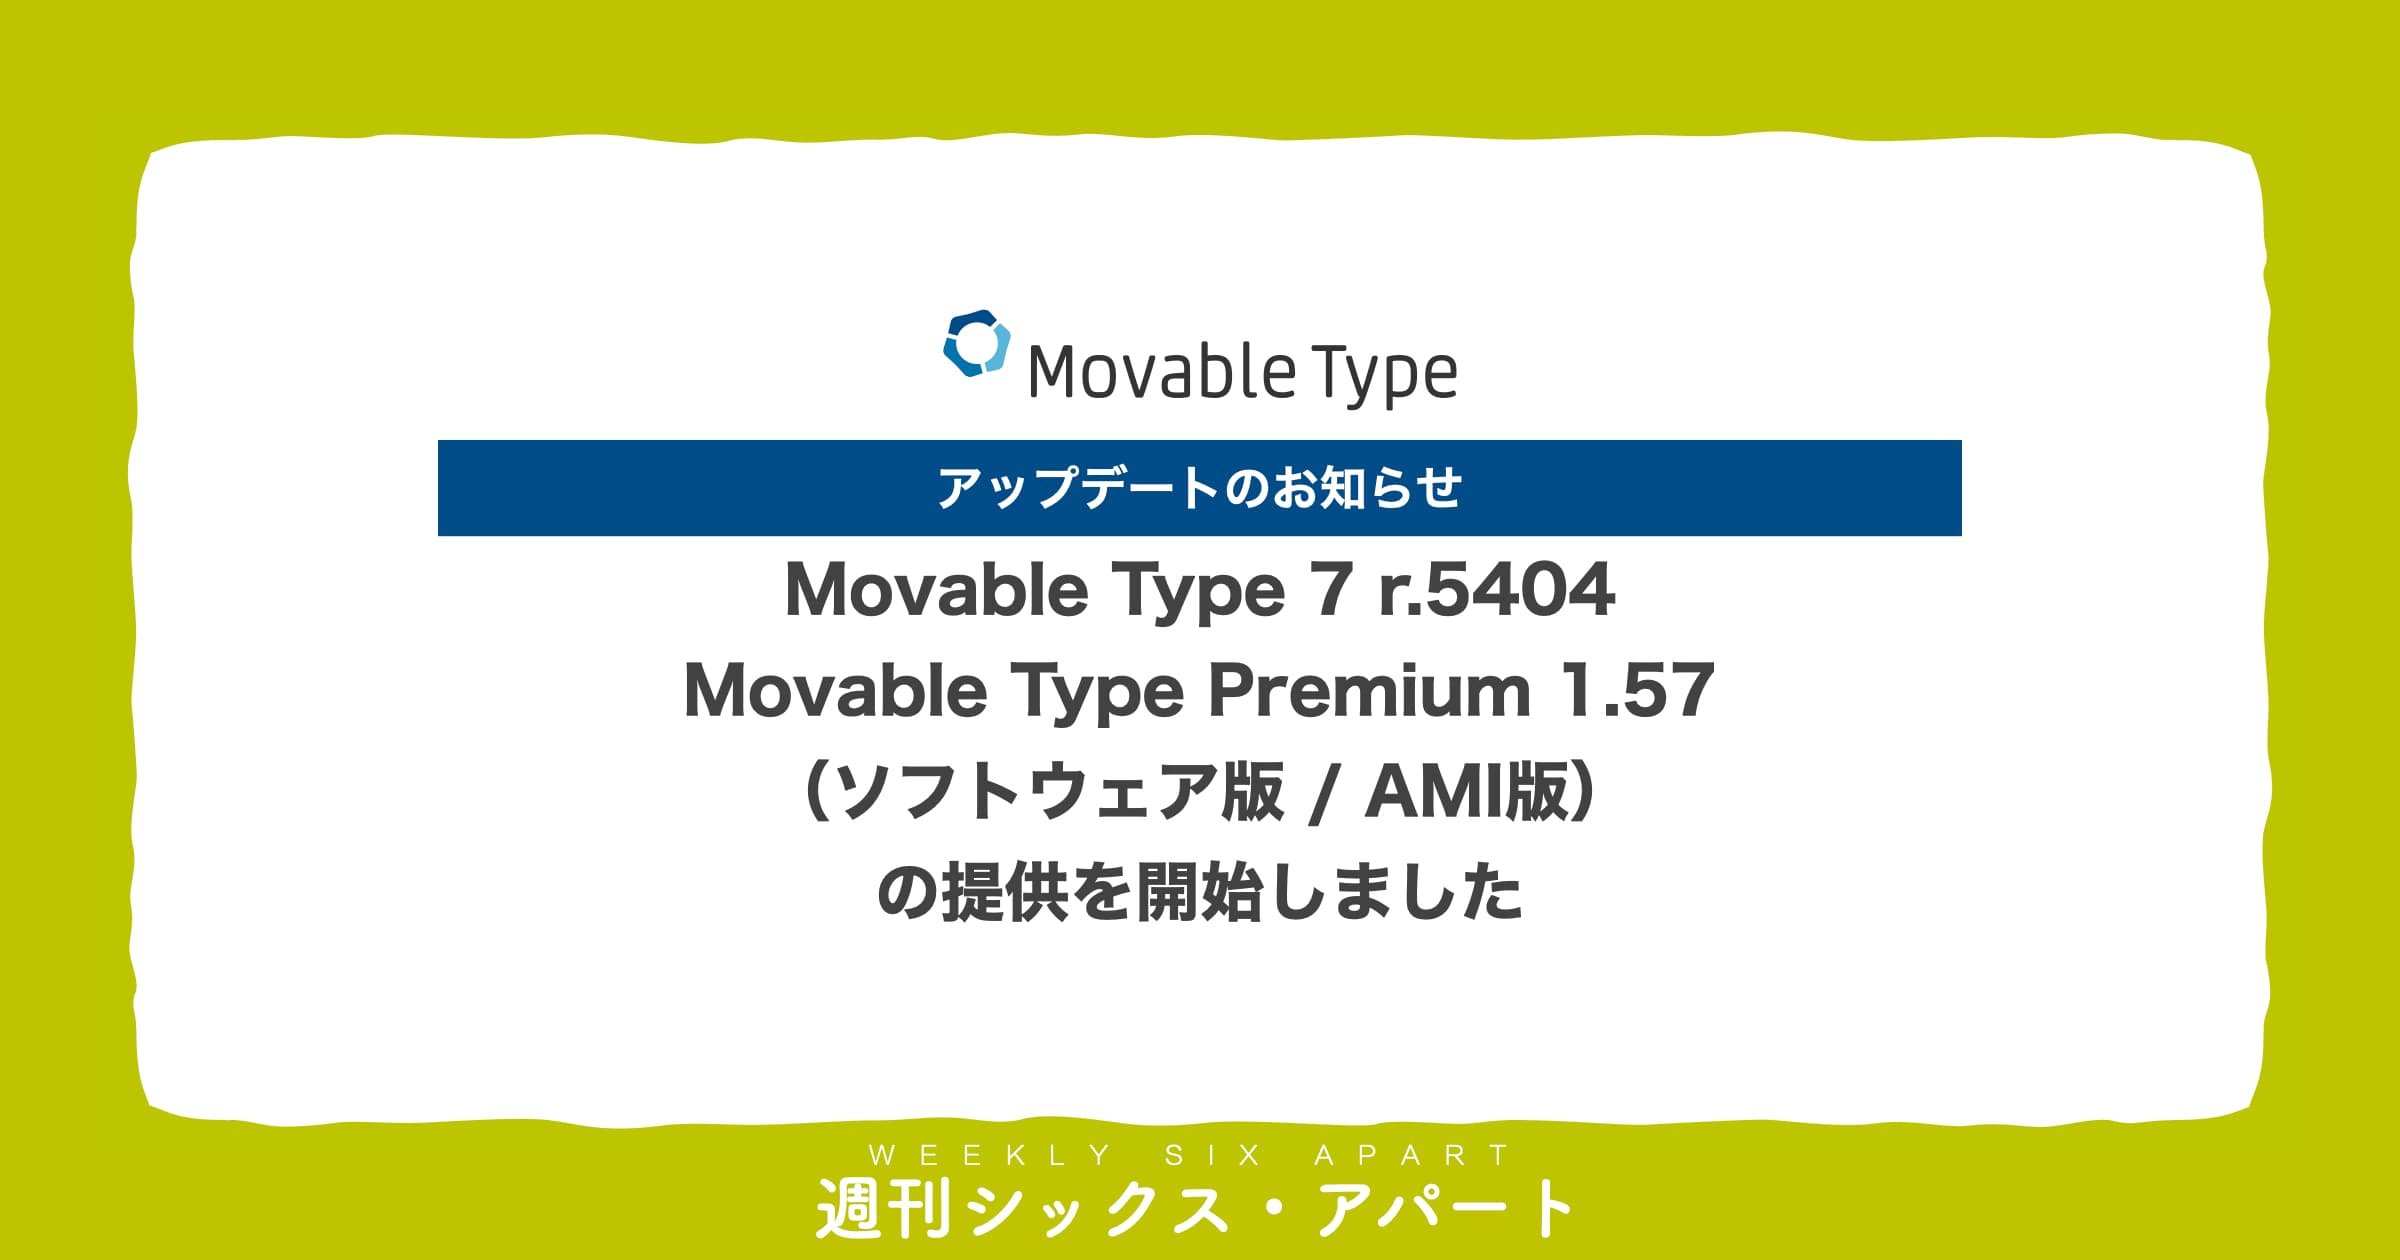 Movable Type 7 r.5404 / Movable Type Premium 1.57 の提供を開始（ソフトウェア版 / AMI版）しました #週刊SA